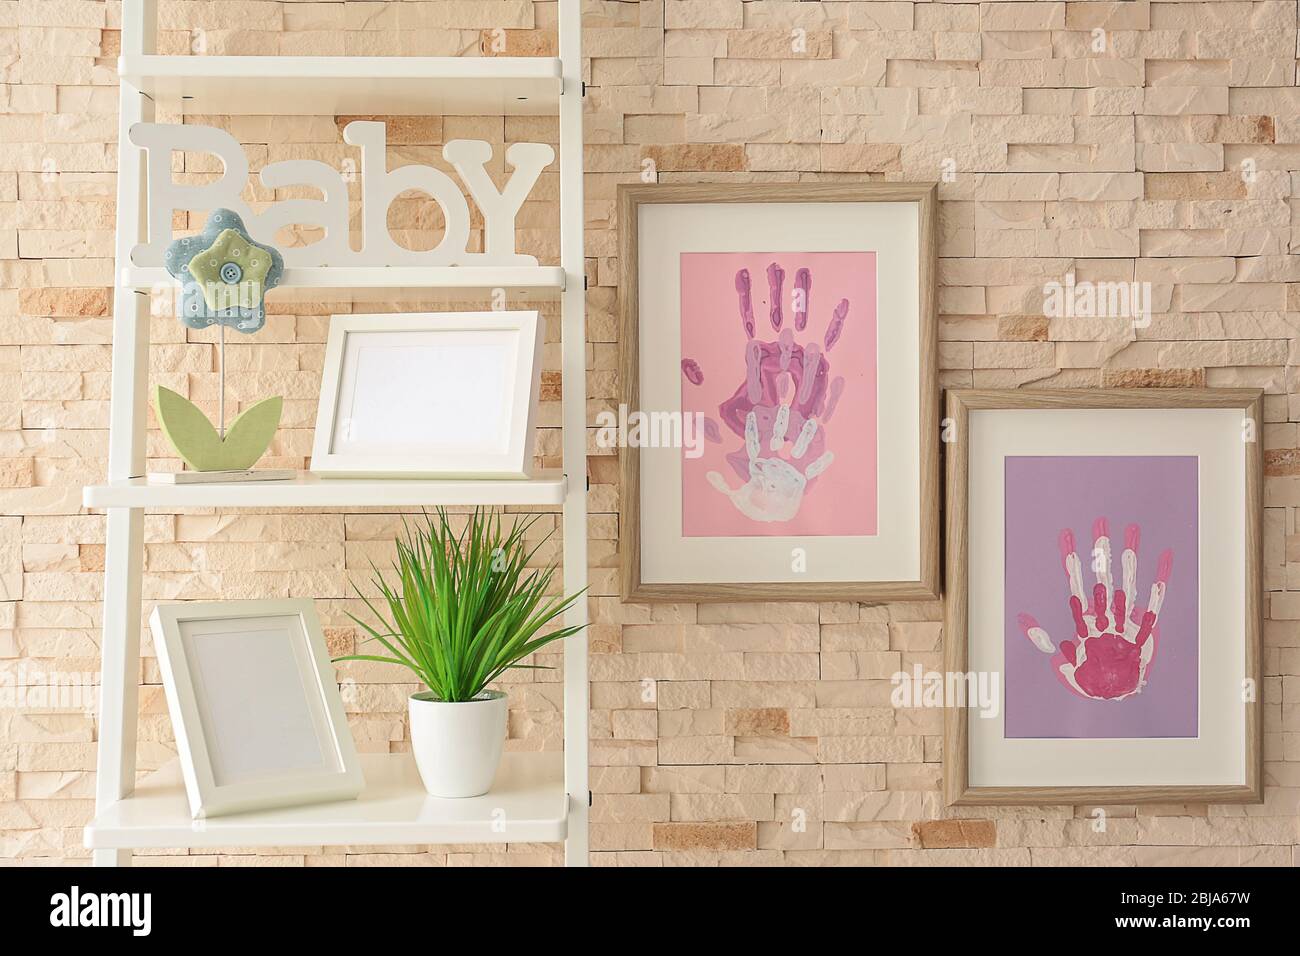 Family hand prints in frame hanging on brick wall Stock Photo